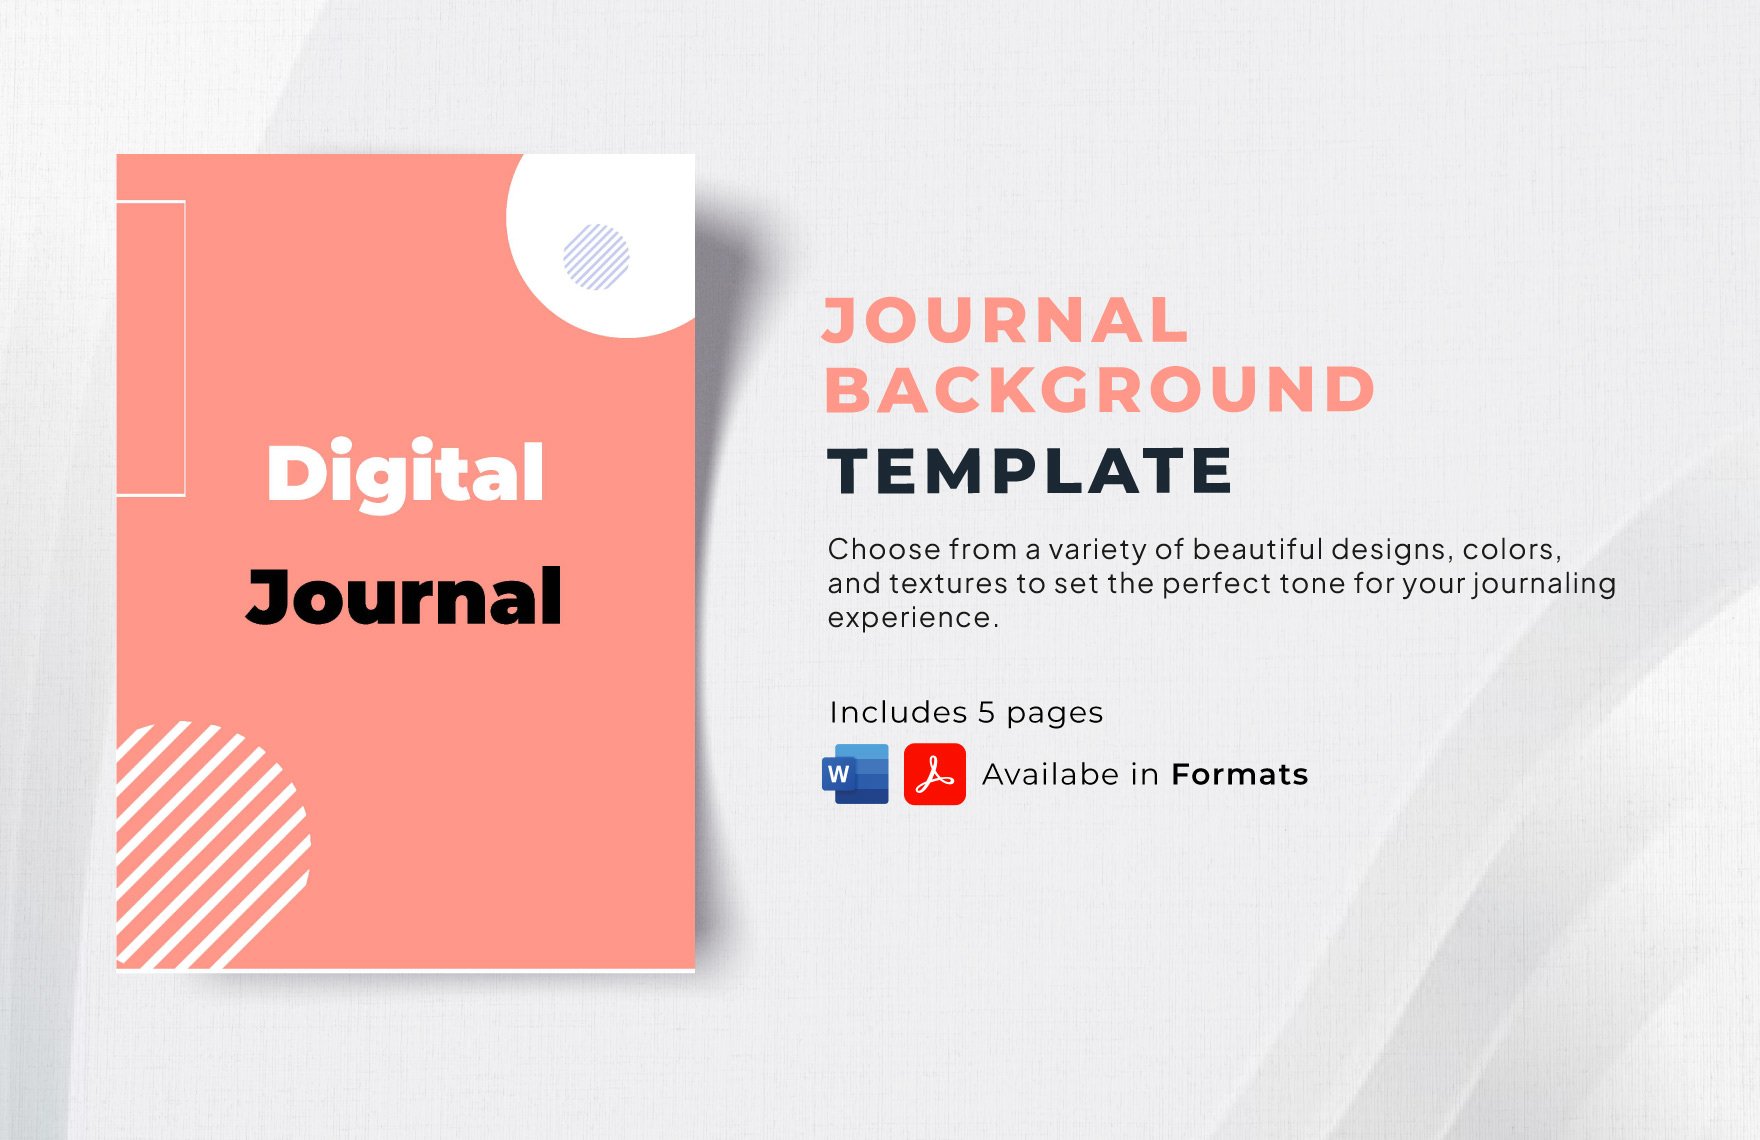 Journal Background Template